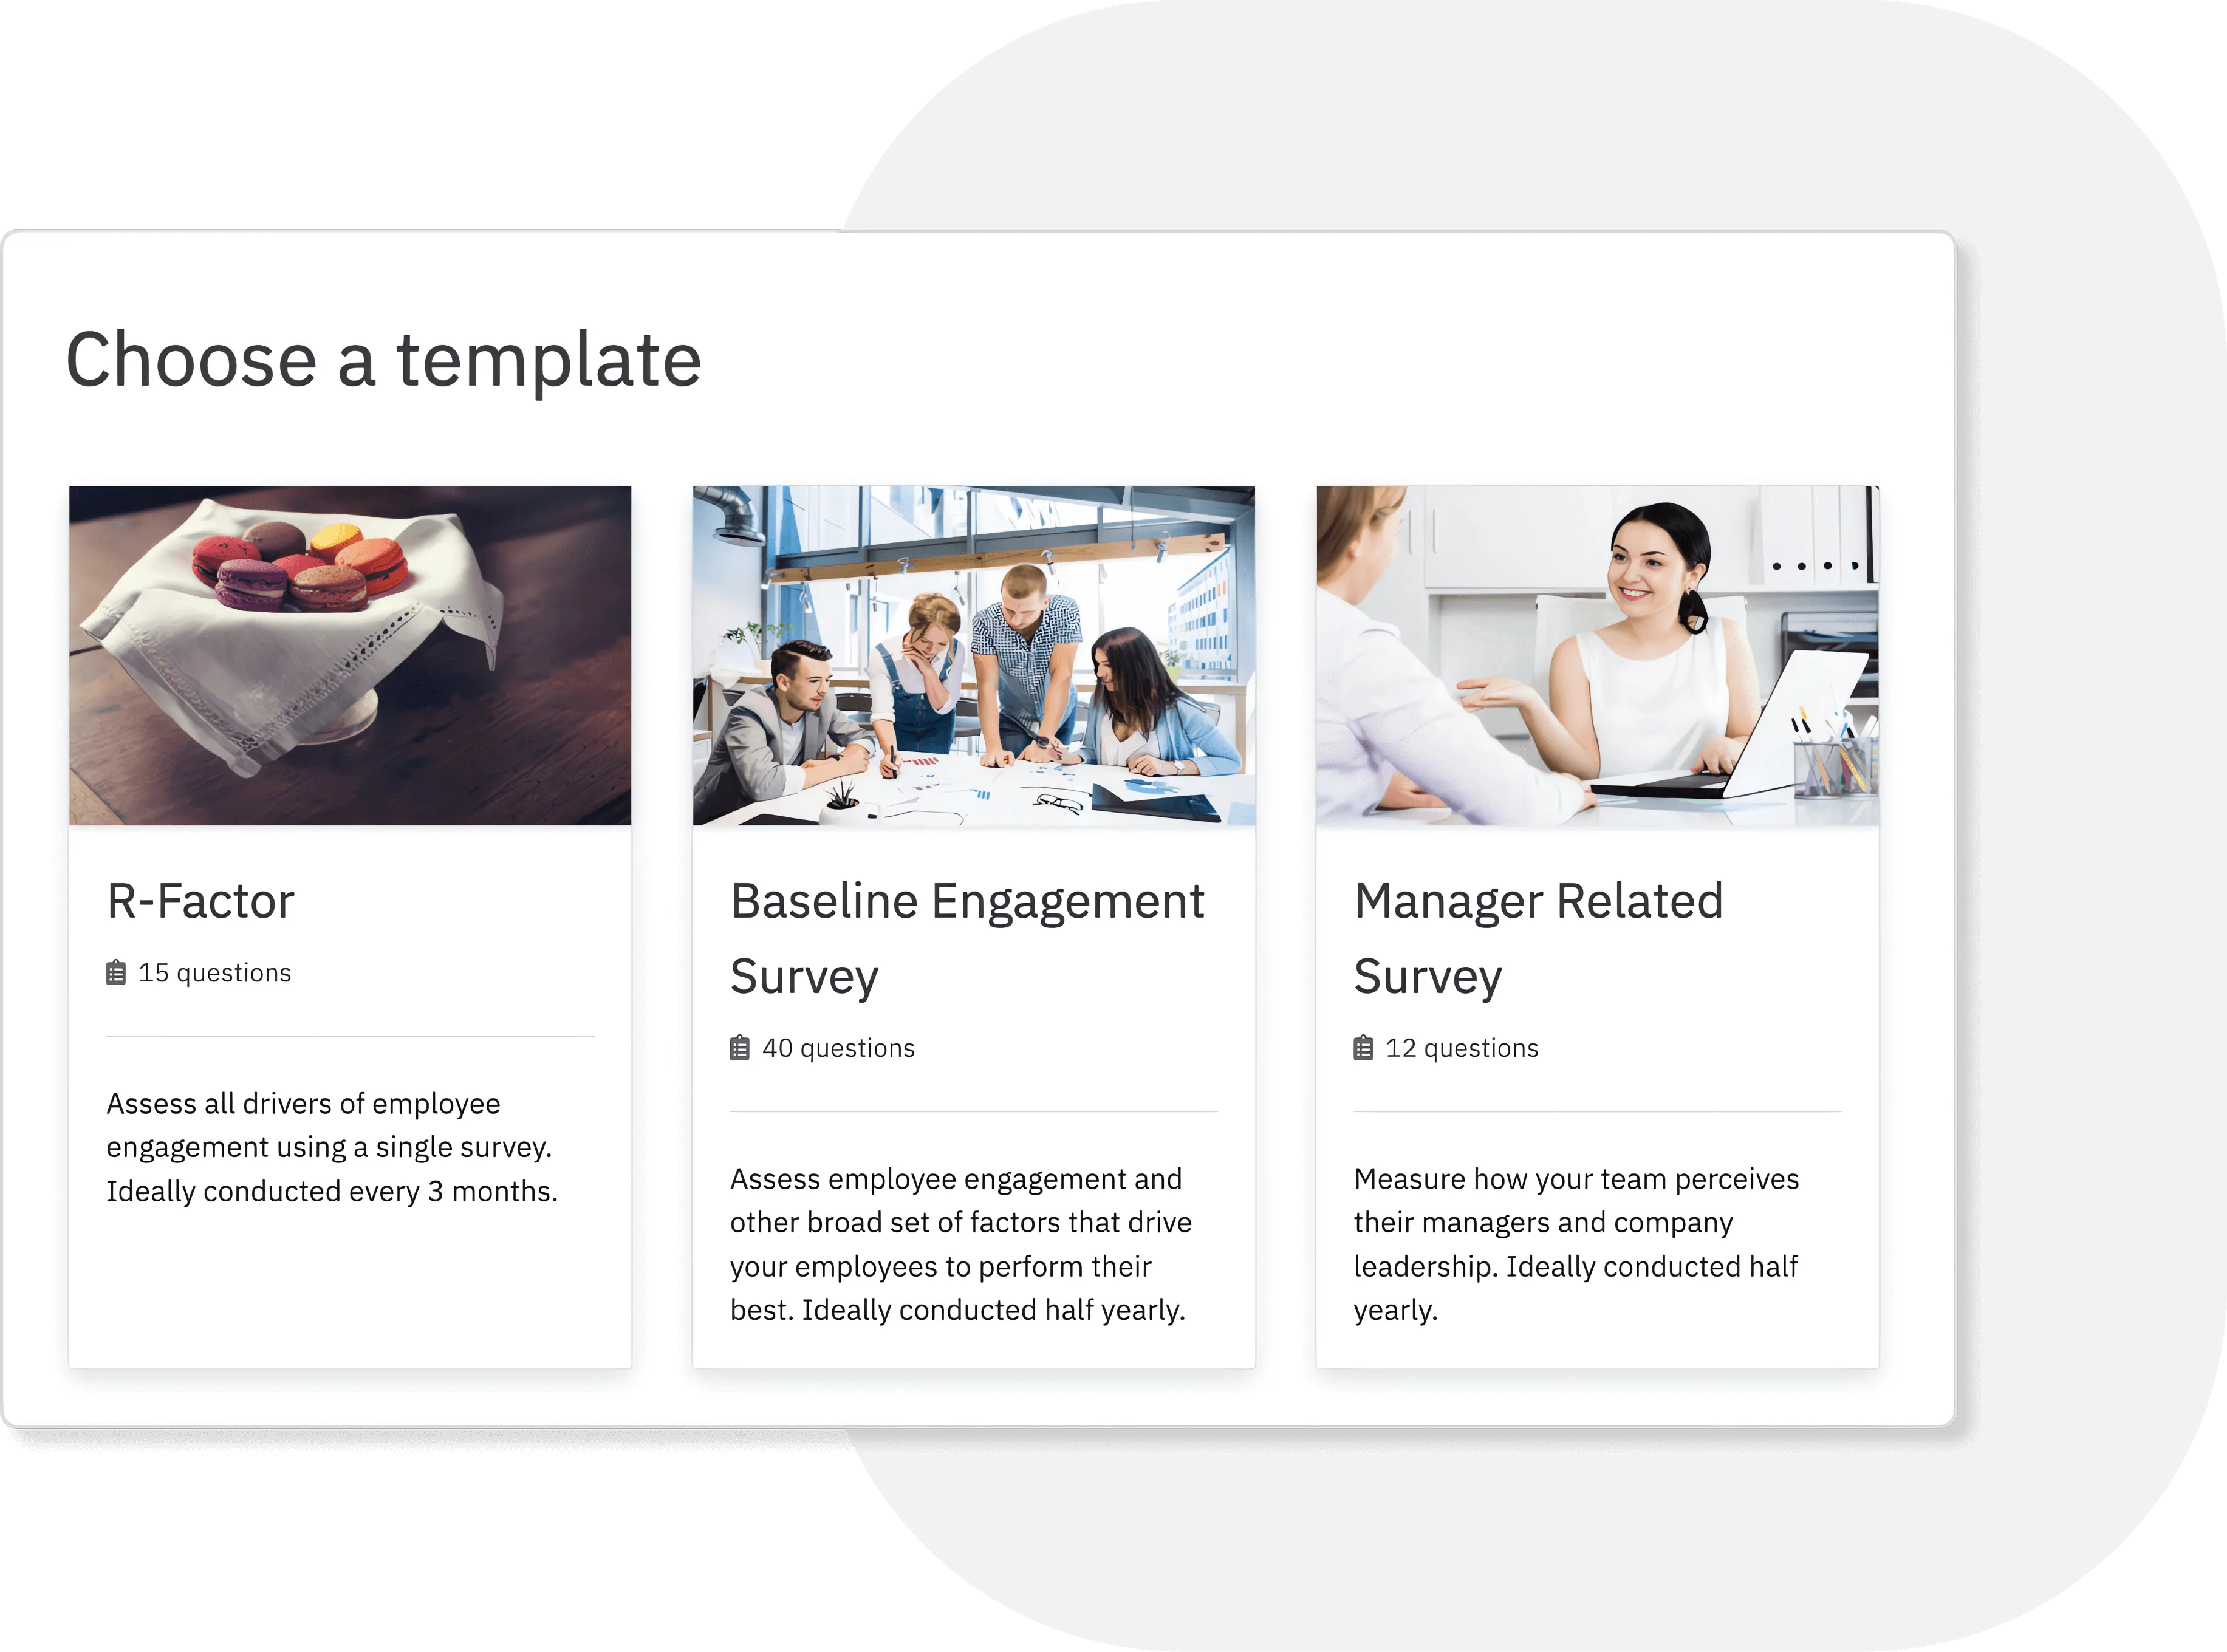 Choose from a collection of 100+ survey templates to measure employee experience